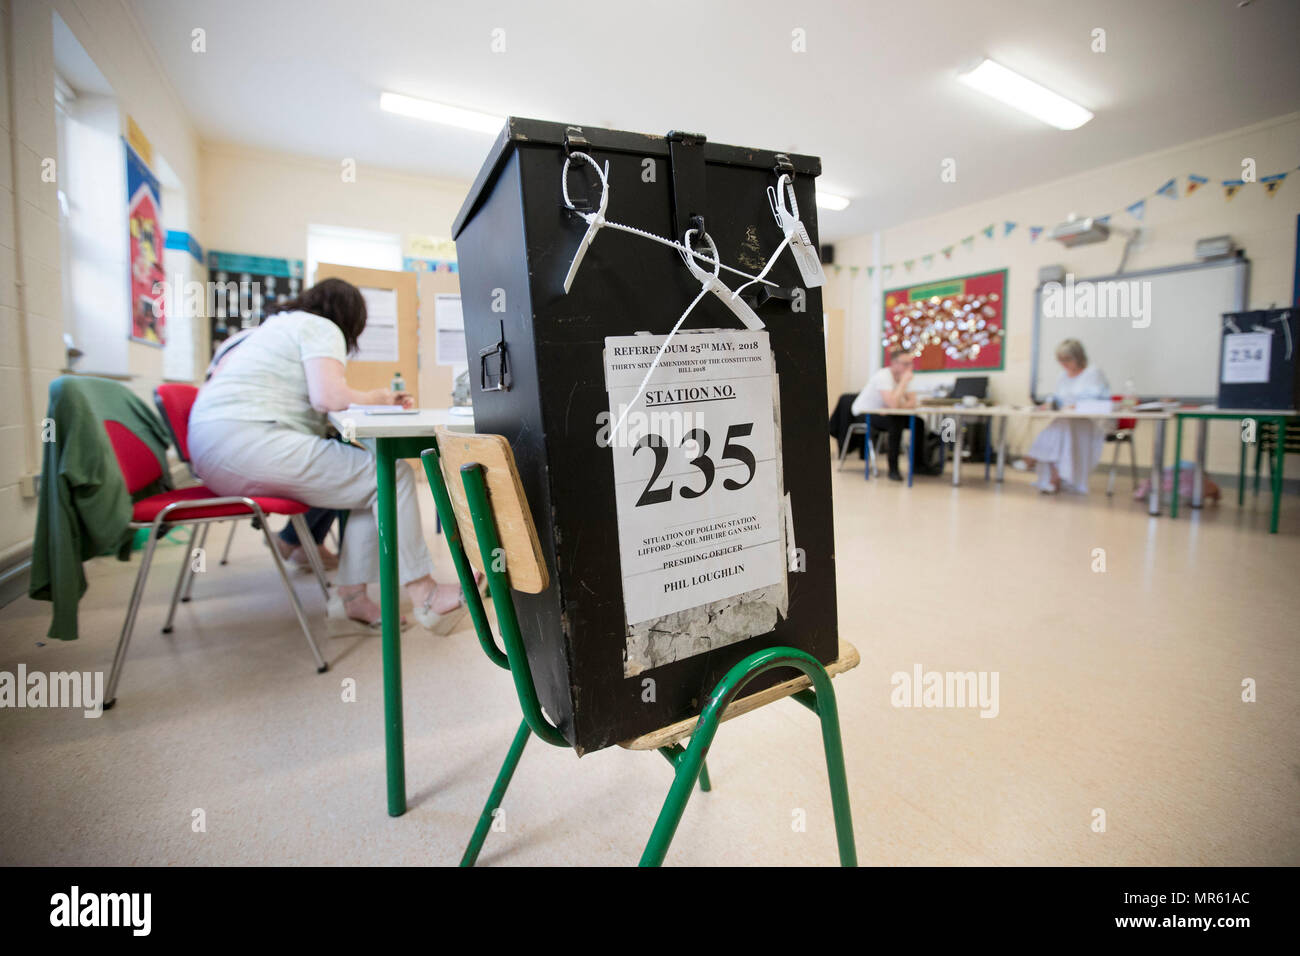 Ballott box at Scoil Mhuire Gan Smal Polling Station, Lifford, Co. Donegal, as the country goes to the polls to vote in the referendum on the 8th Amendment of the Irish Constitution. Stock Photo